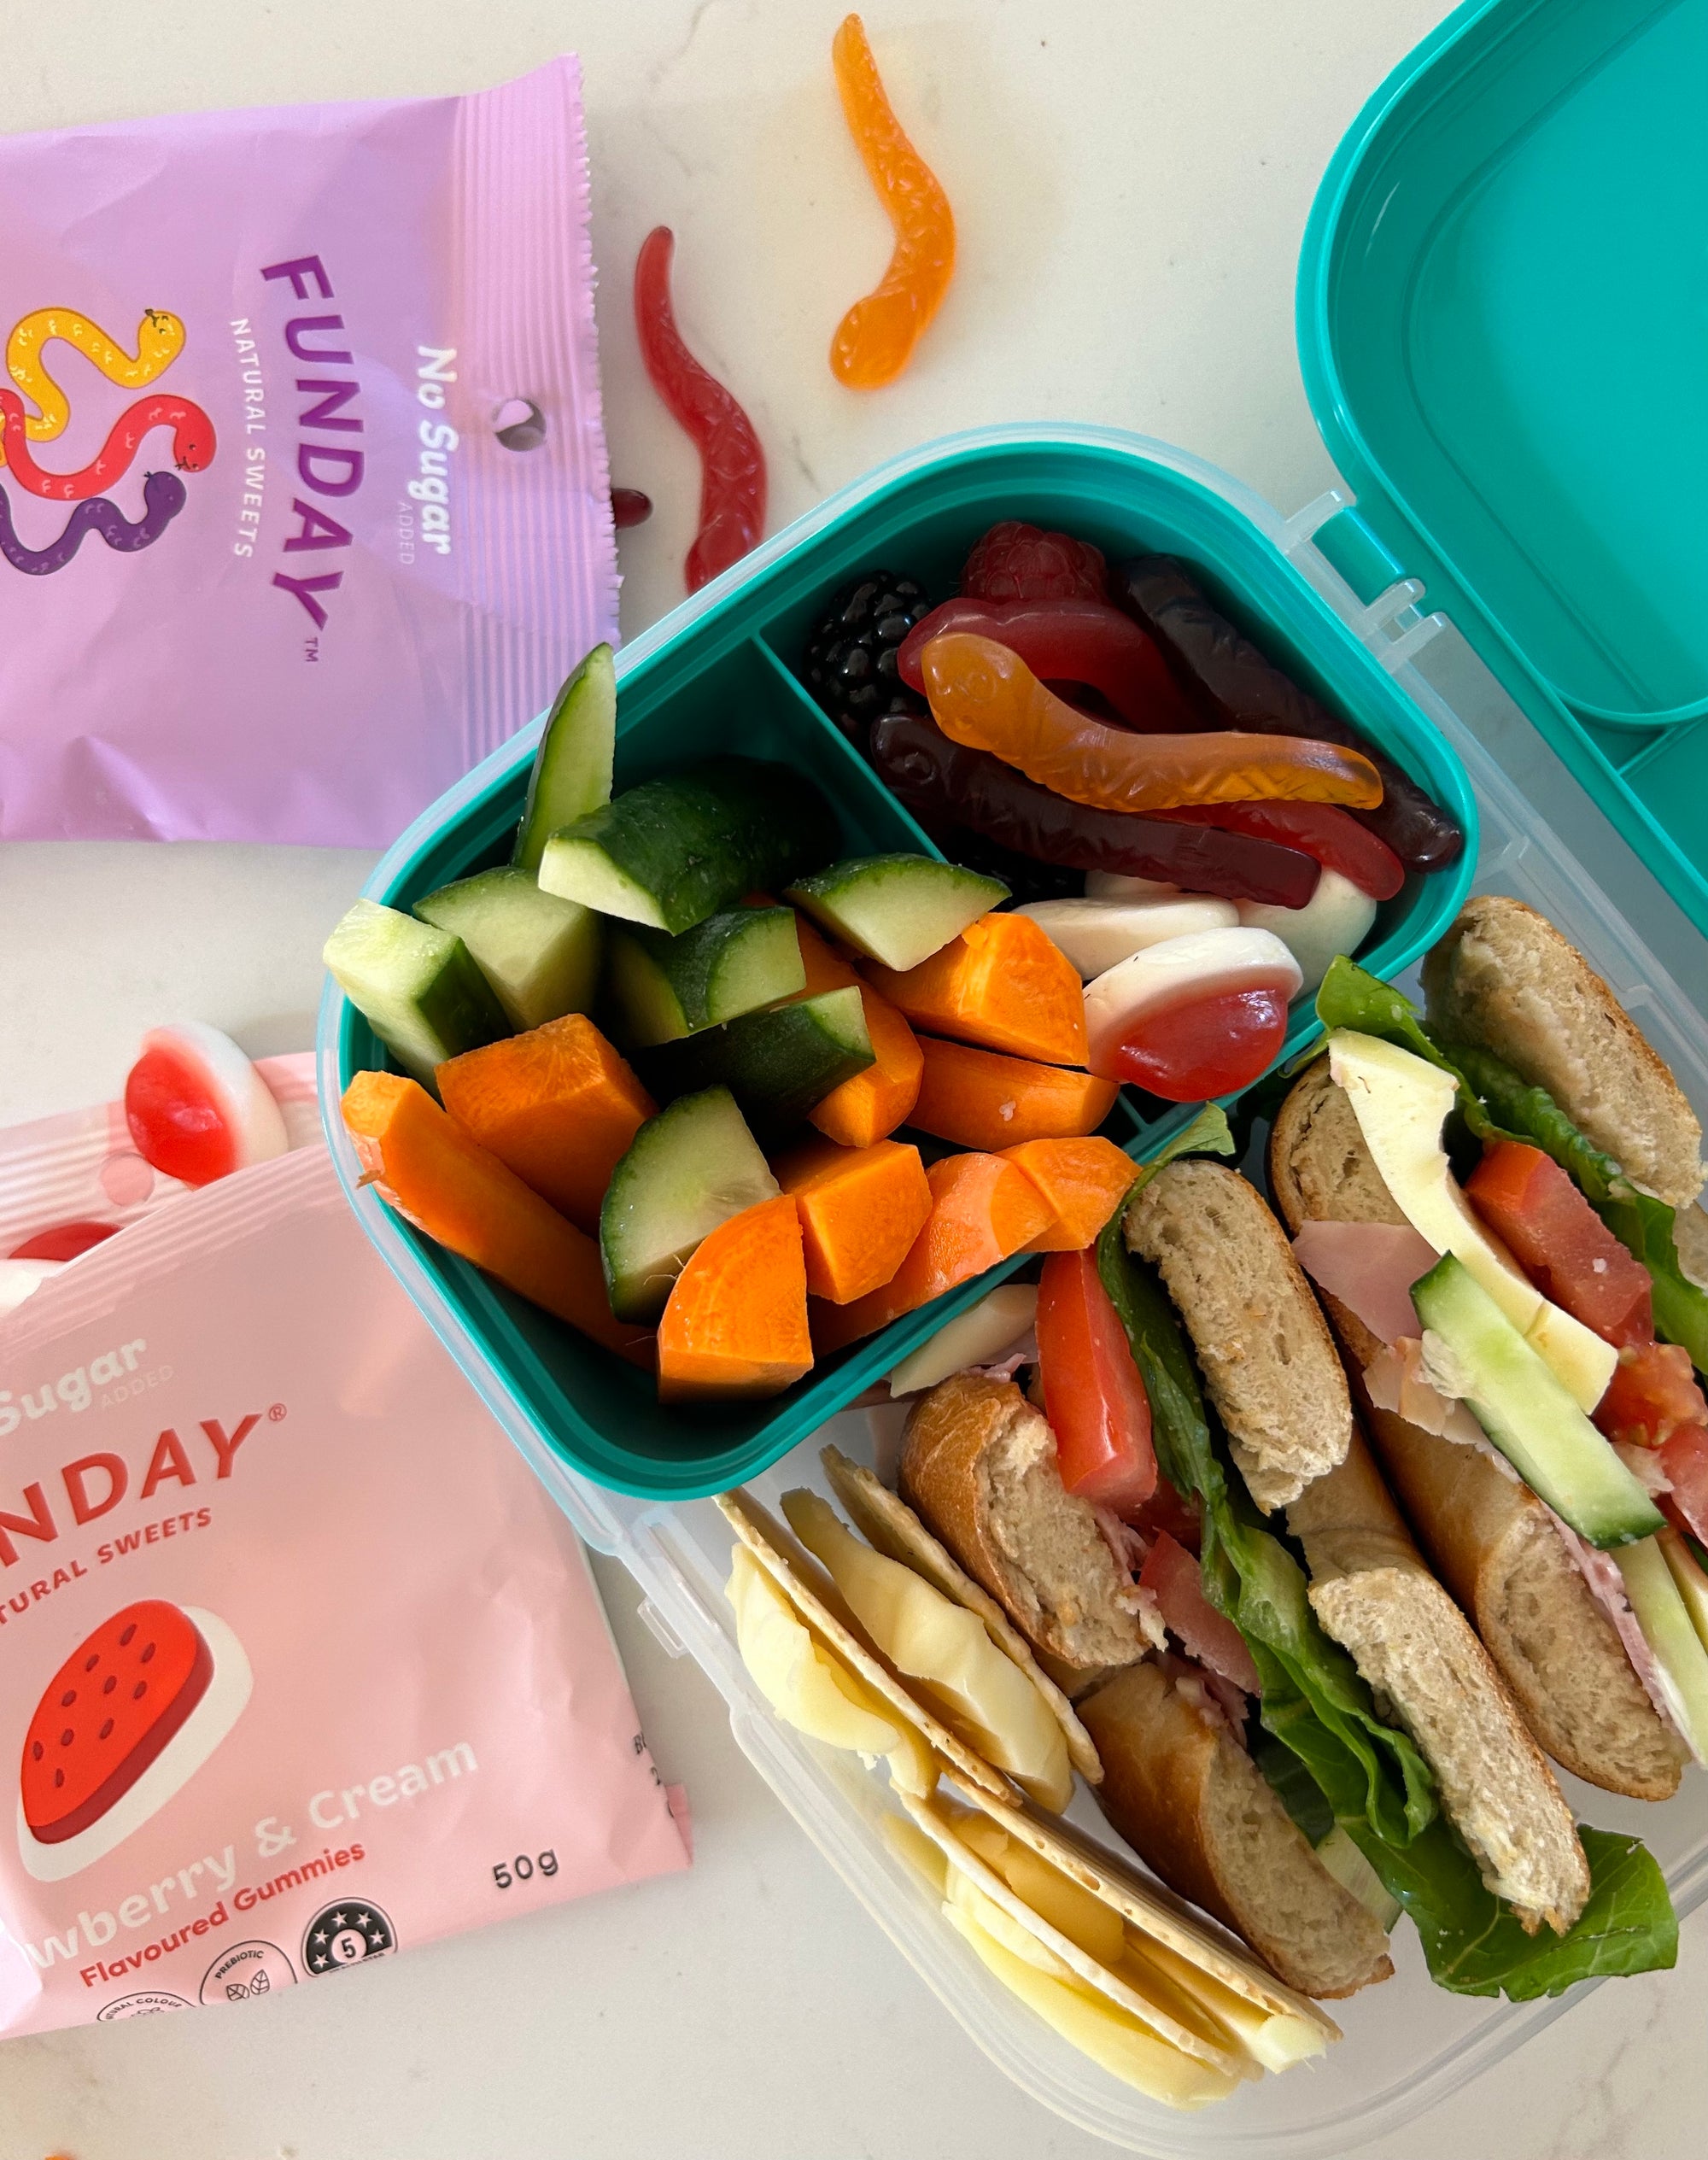 Healthy Office Lunch Ideas: Elevate Your Bento Box with FUNDAY Natural Sweets